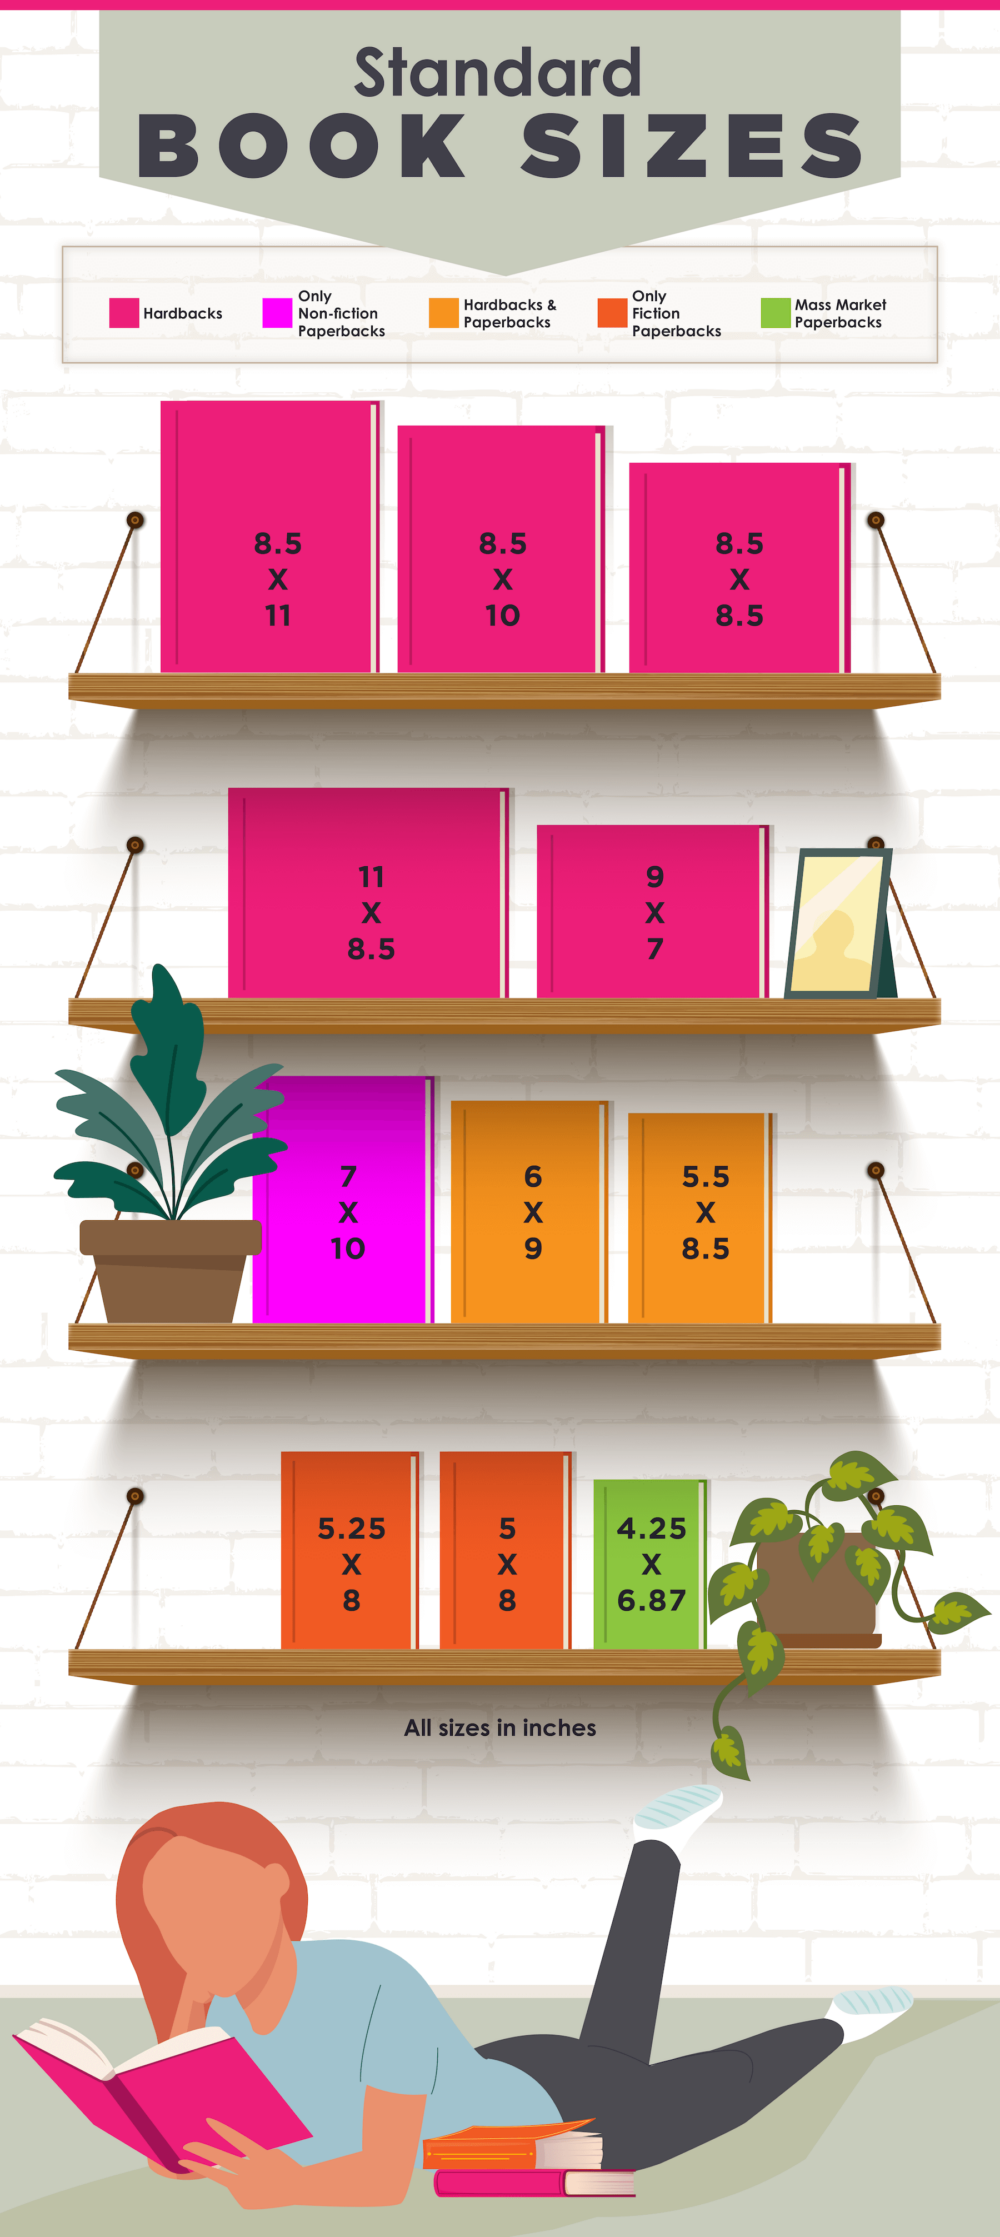 standard book sizes infographic